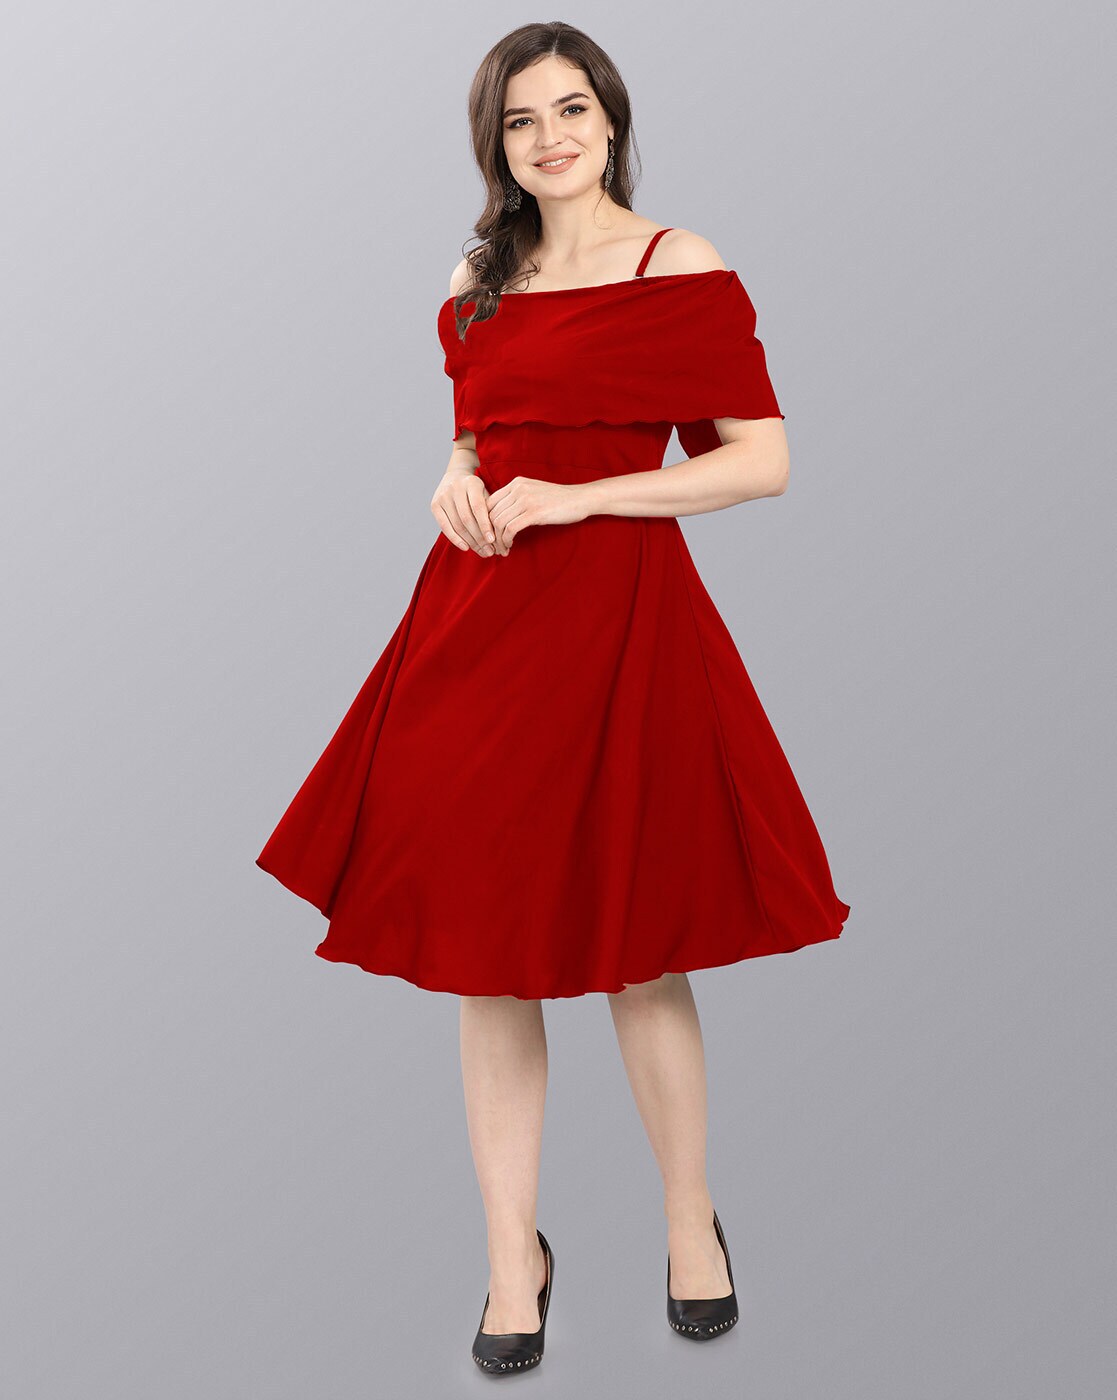 OFF THE SHOULDER SWEETHEART NECKLINE FAUX-WRAP DRESS (RED) – Dress Code  Chic Official